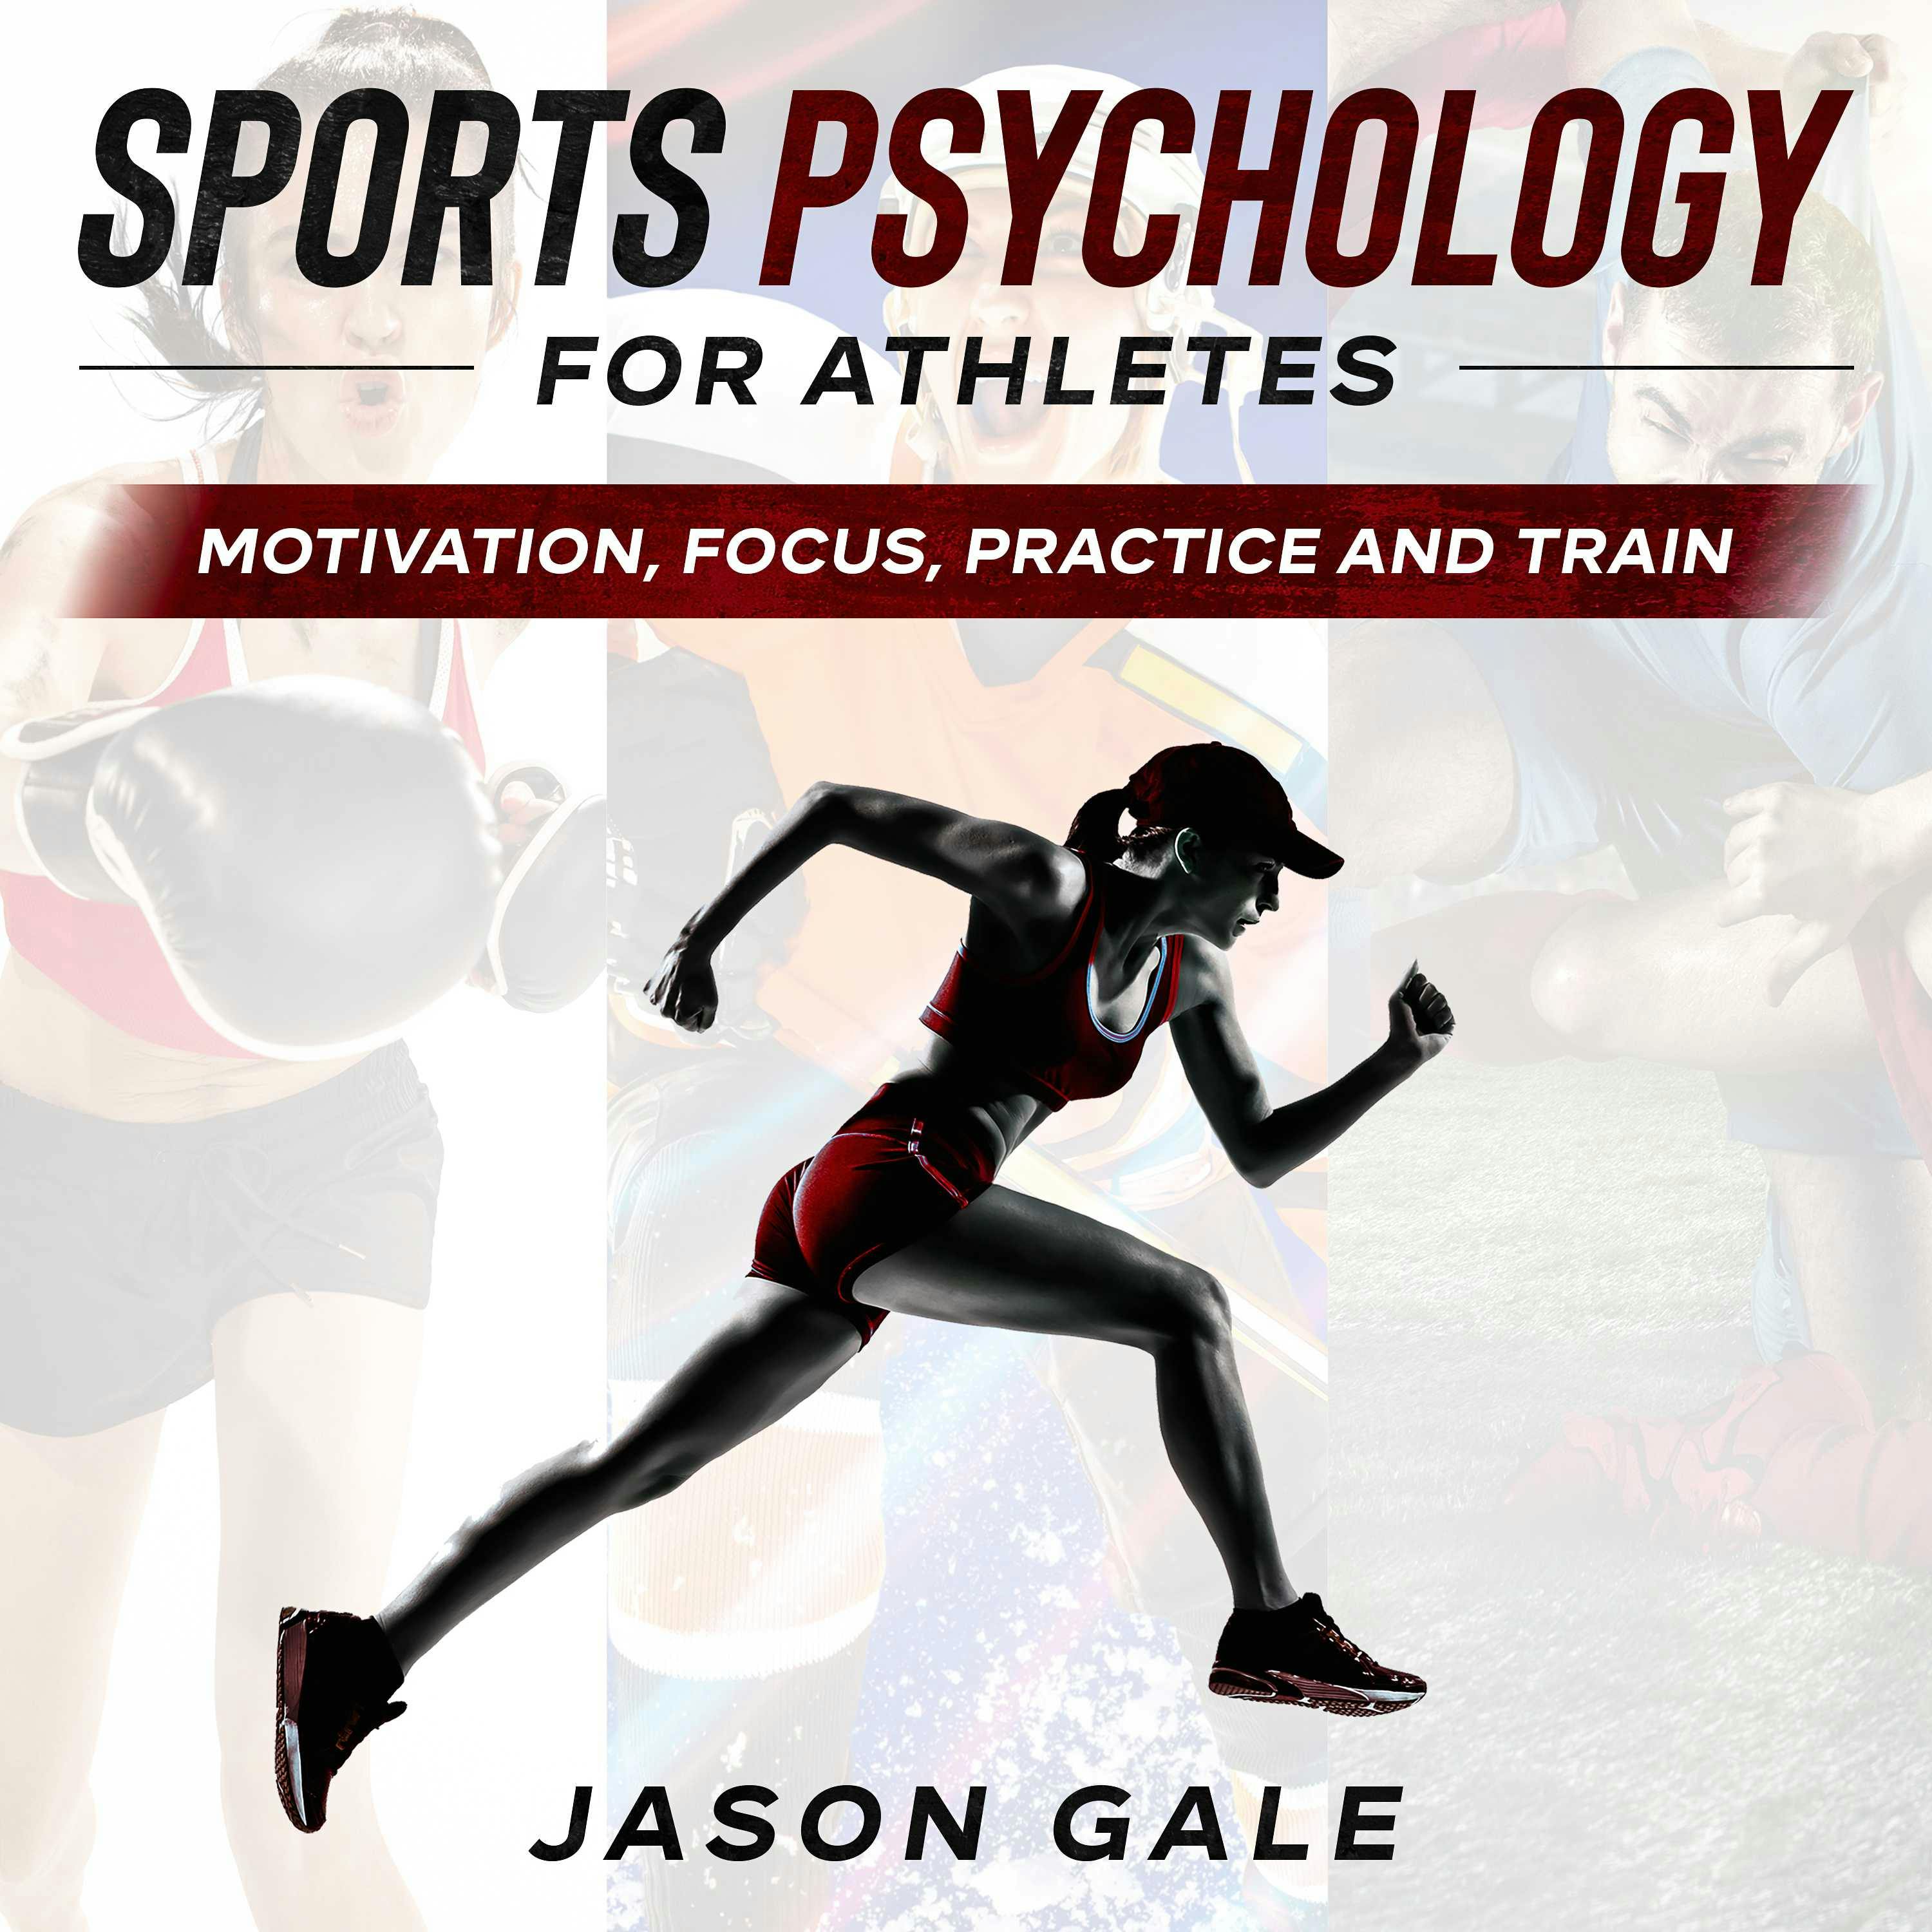 Sports Psychology For Athletes: Motivation, Focus, Practice and Train - undefined